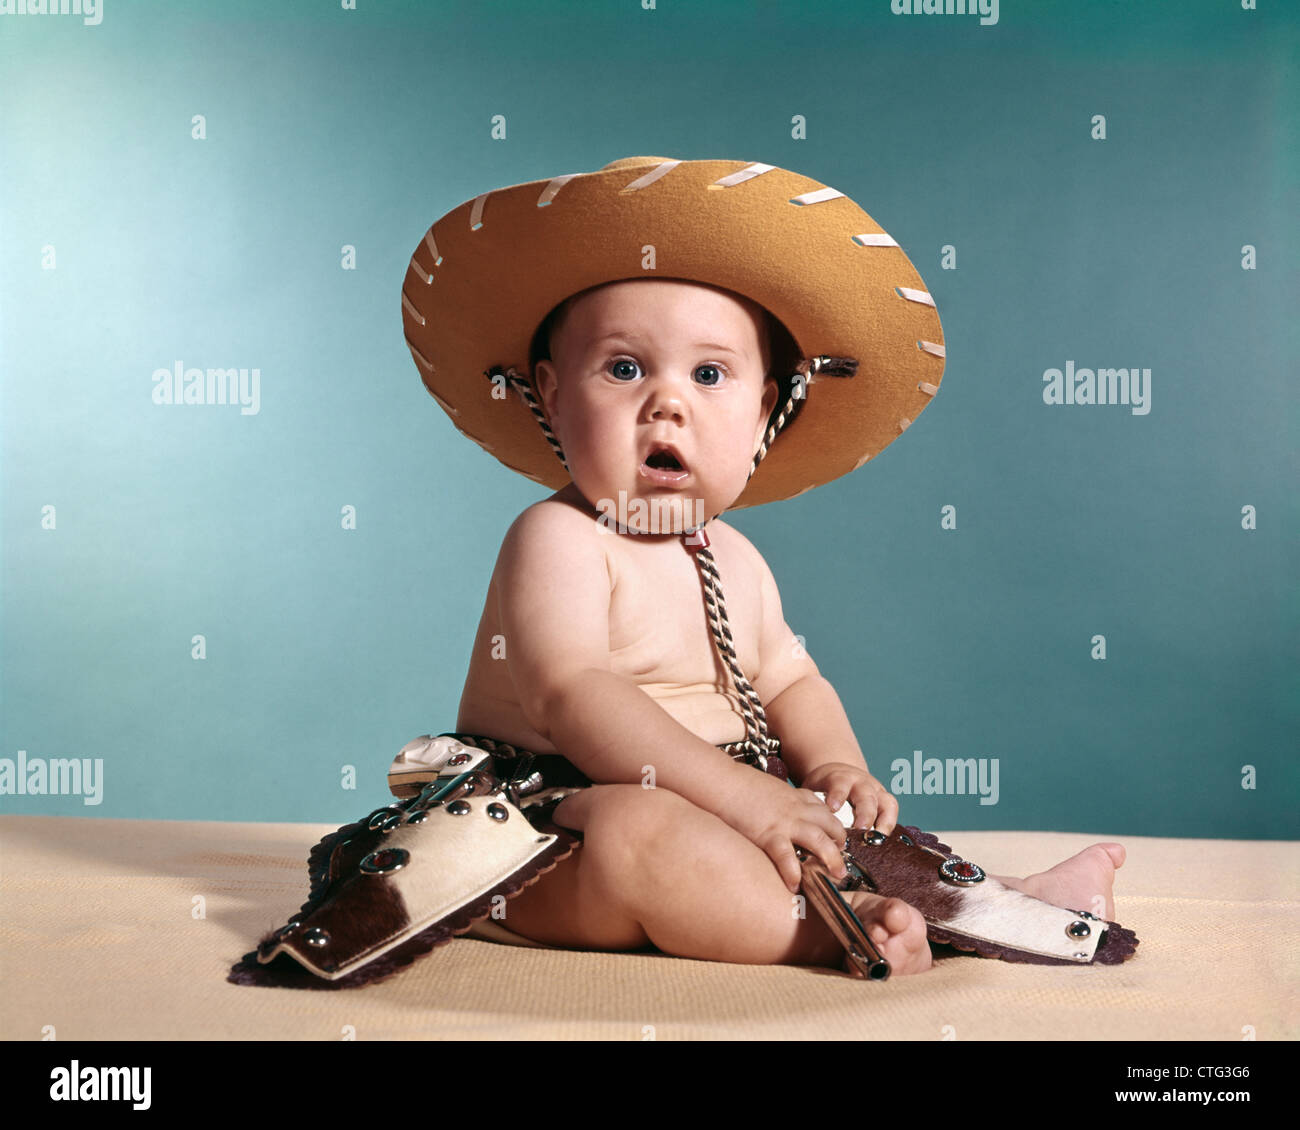 1960s BABY WEARING COWBOY COSTUME WITH FUNNY FACIAL EXPRESSION LOOKING AT CAMERA Stock Photo